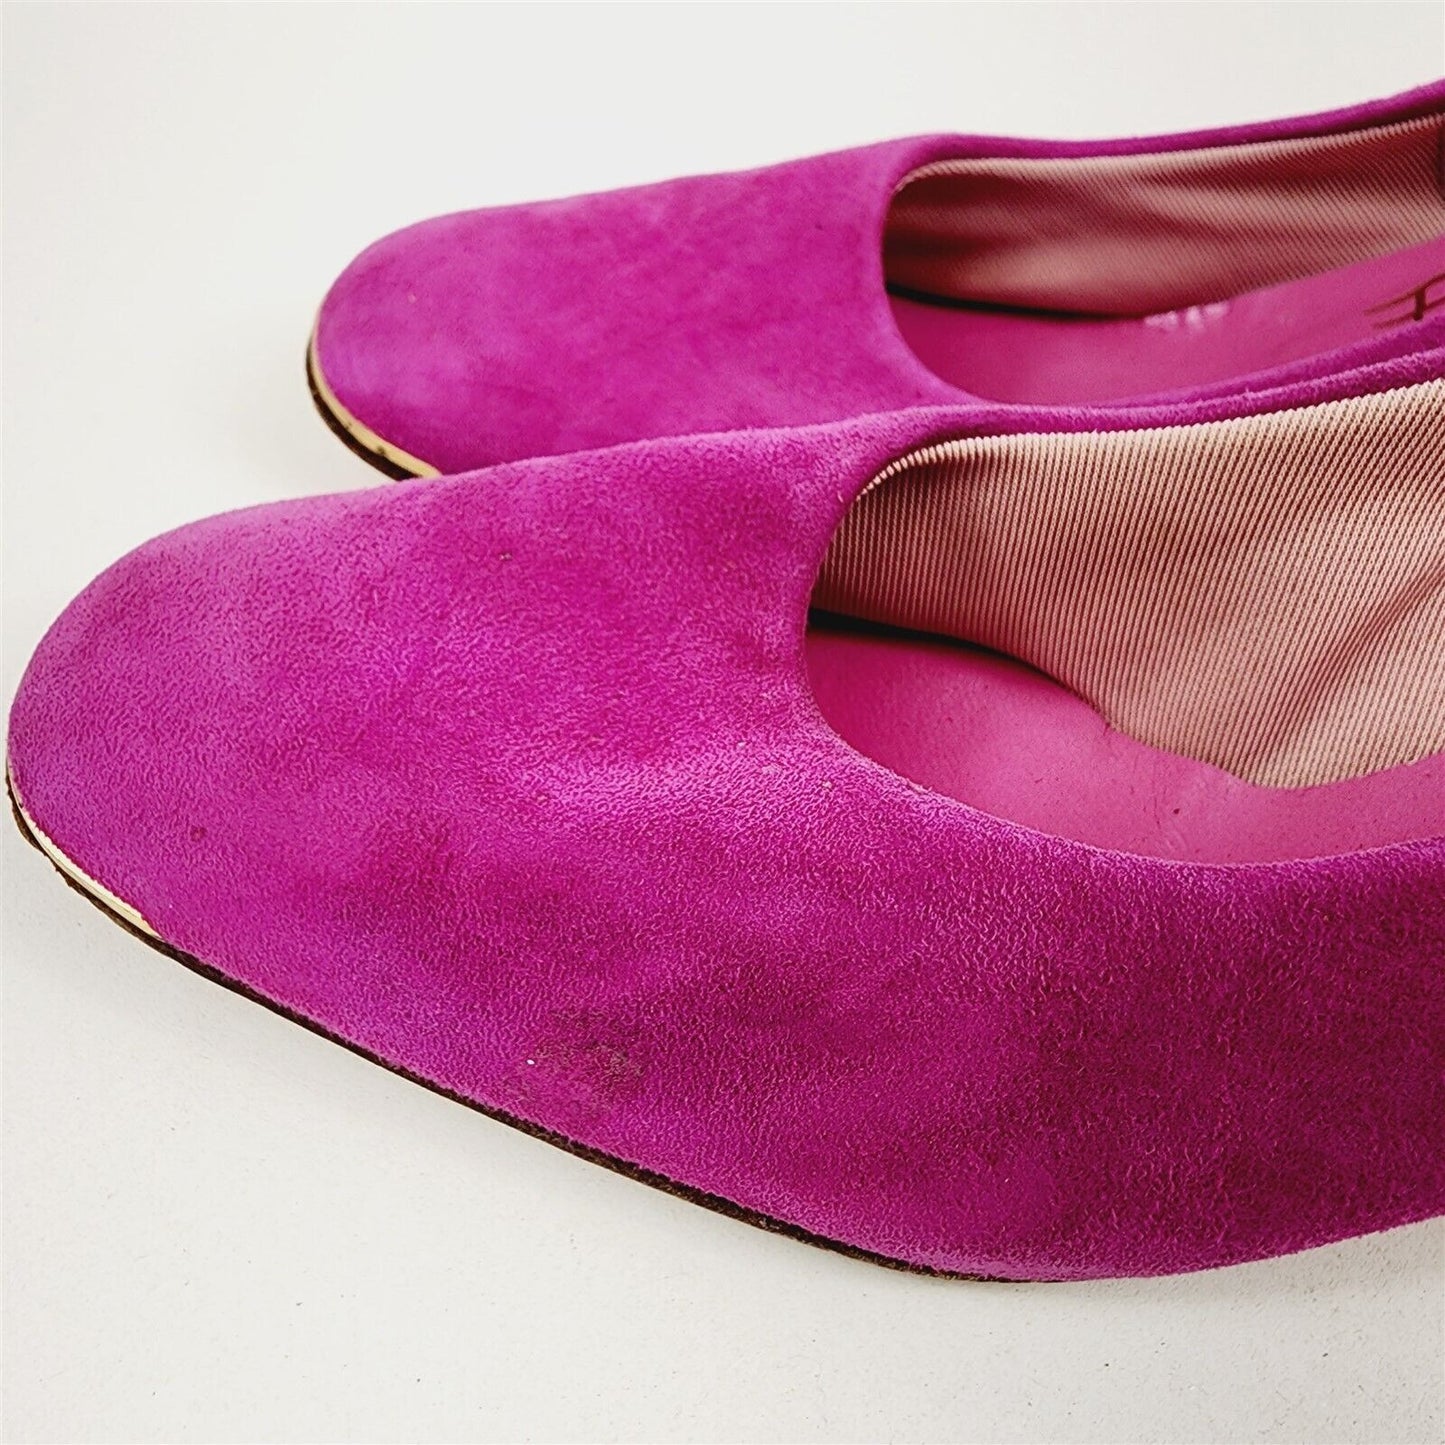 Vintage Frank More Purple Suede Leather Heels Shoes Womens Size 8.5